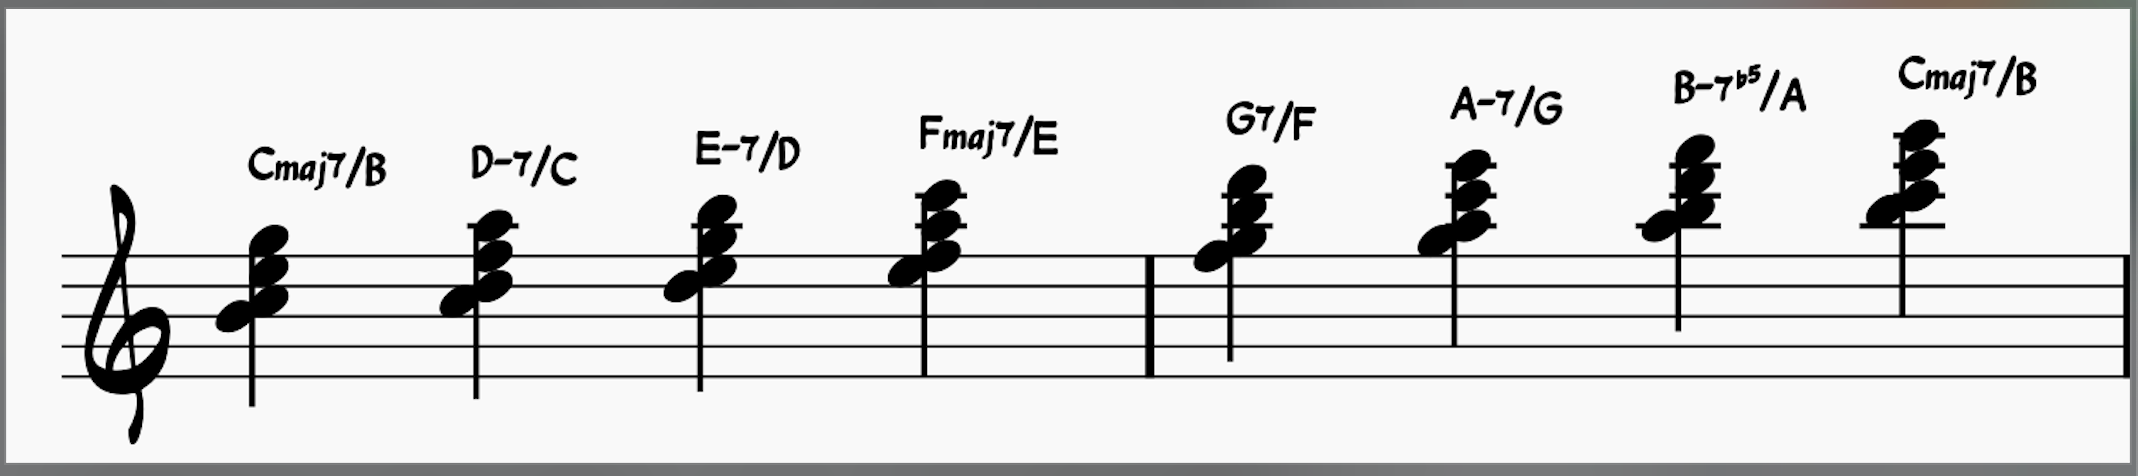 Piano chord inversions: C major chord scale in third inversion